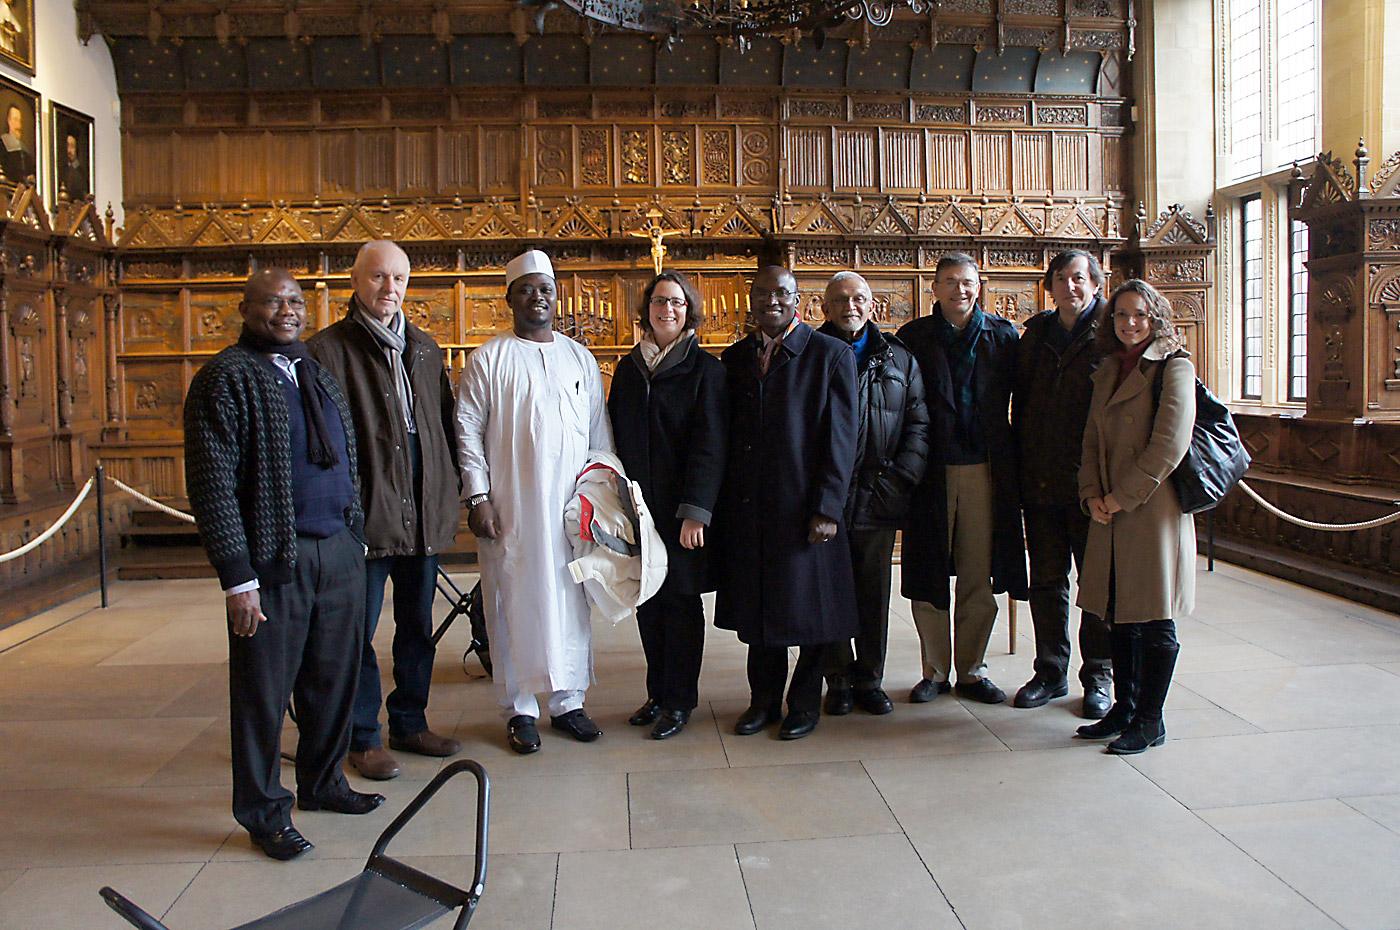 Participants of the Christian-Muslim consultation on public space in the âPeace Hallâ in MÃ¼nster, Germany, where the Peace of Westphalia treaties were signed after the Thirty Years War in Europe. Photo: Marion von Hagen